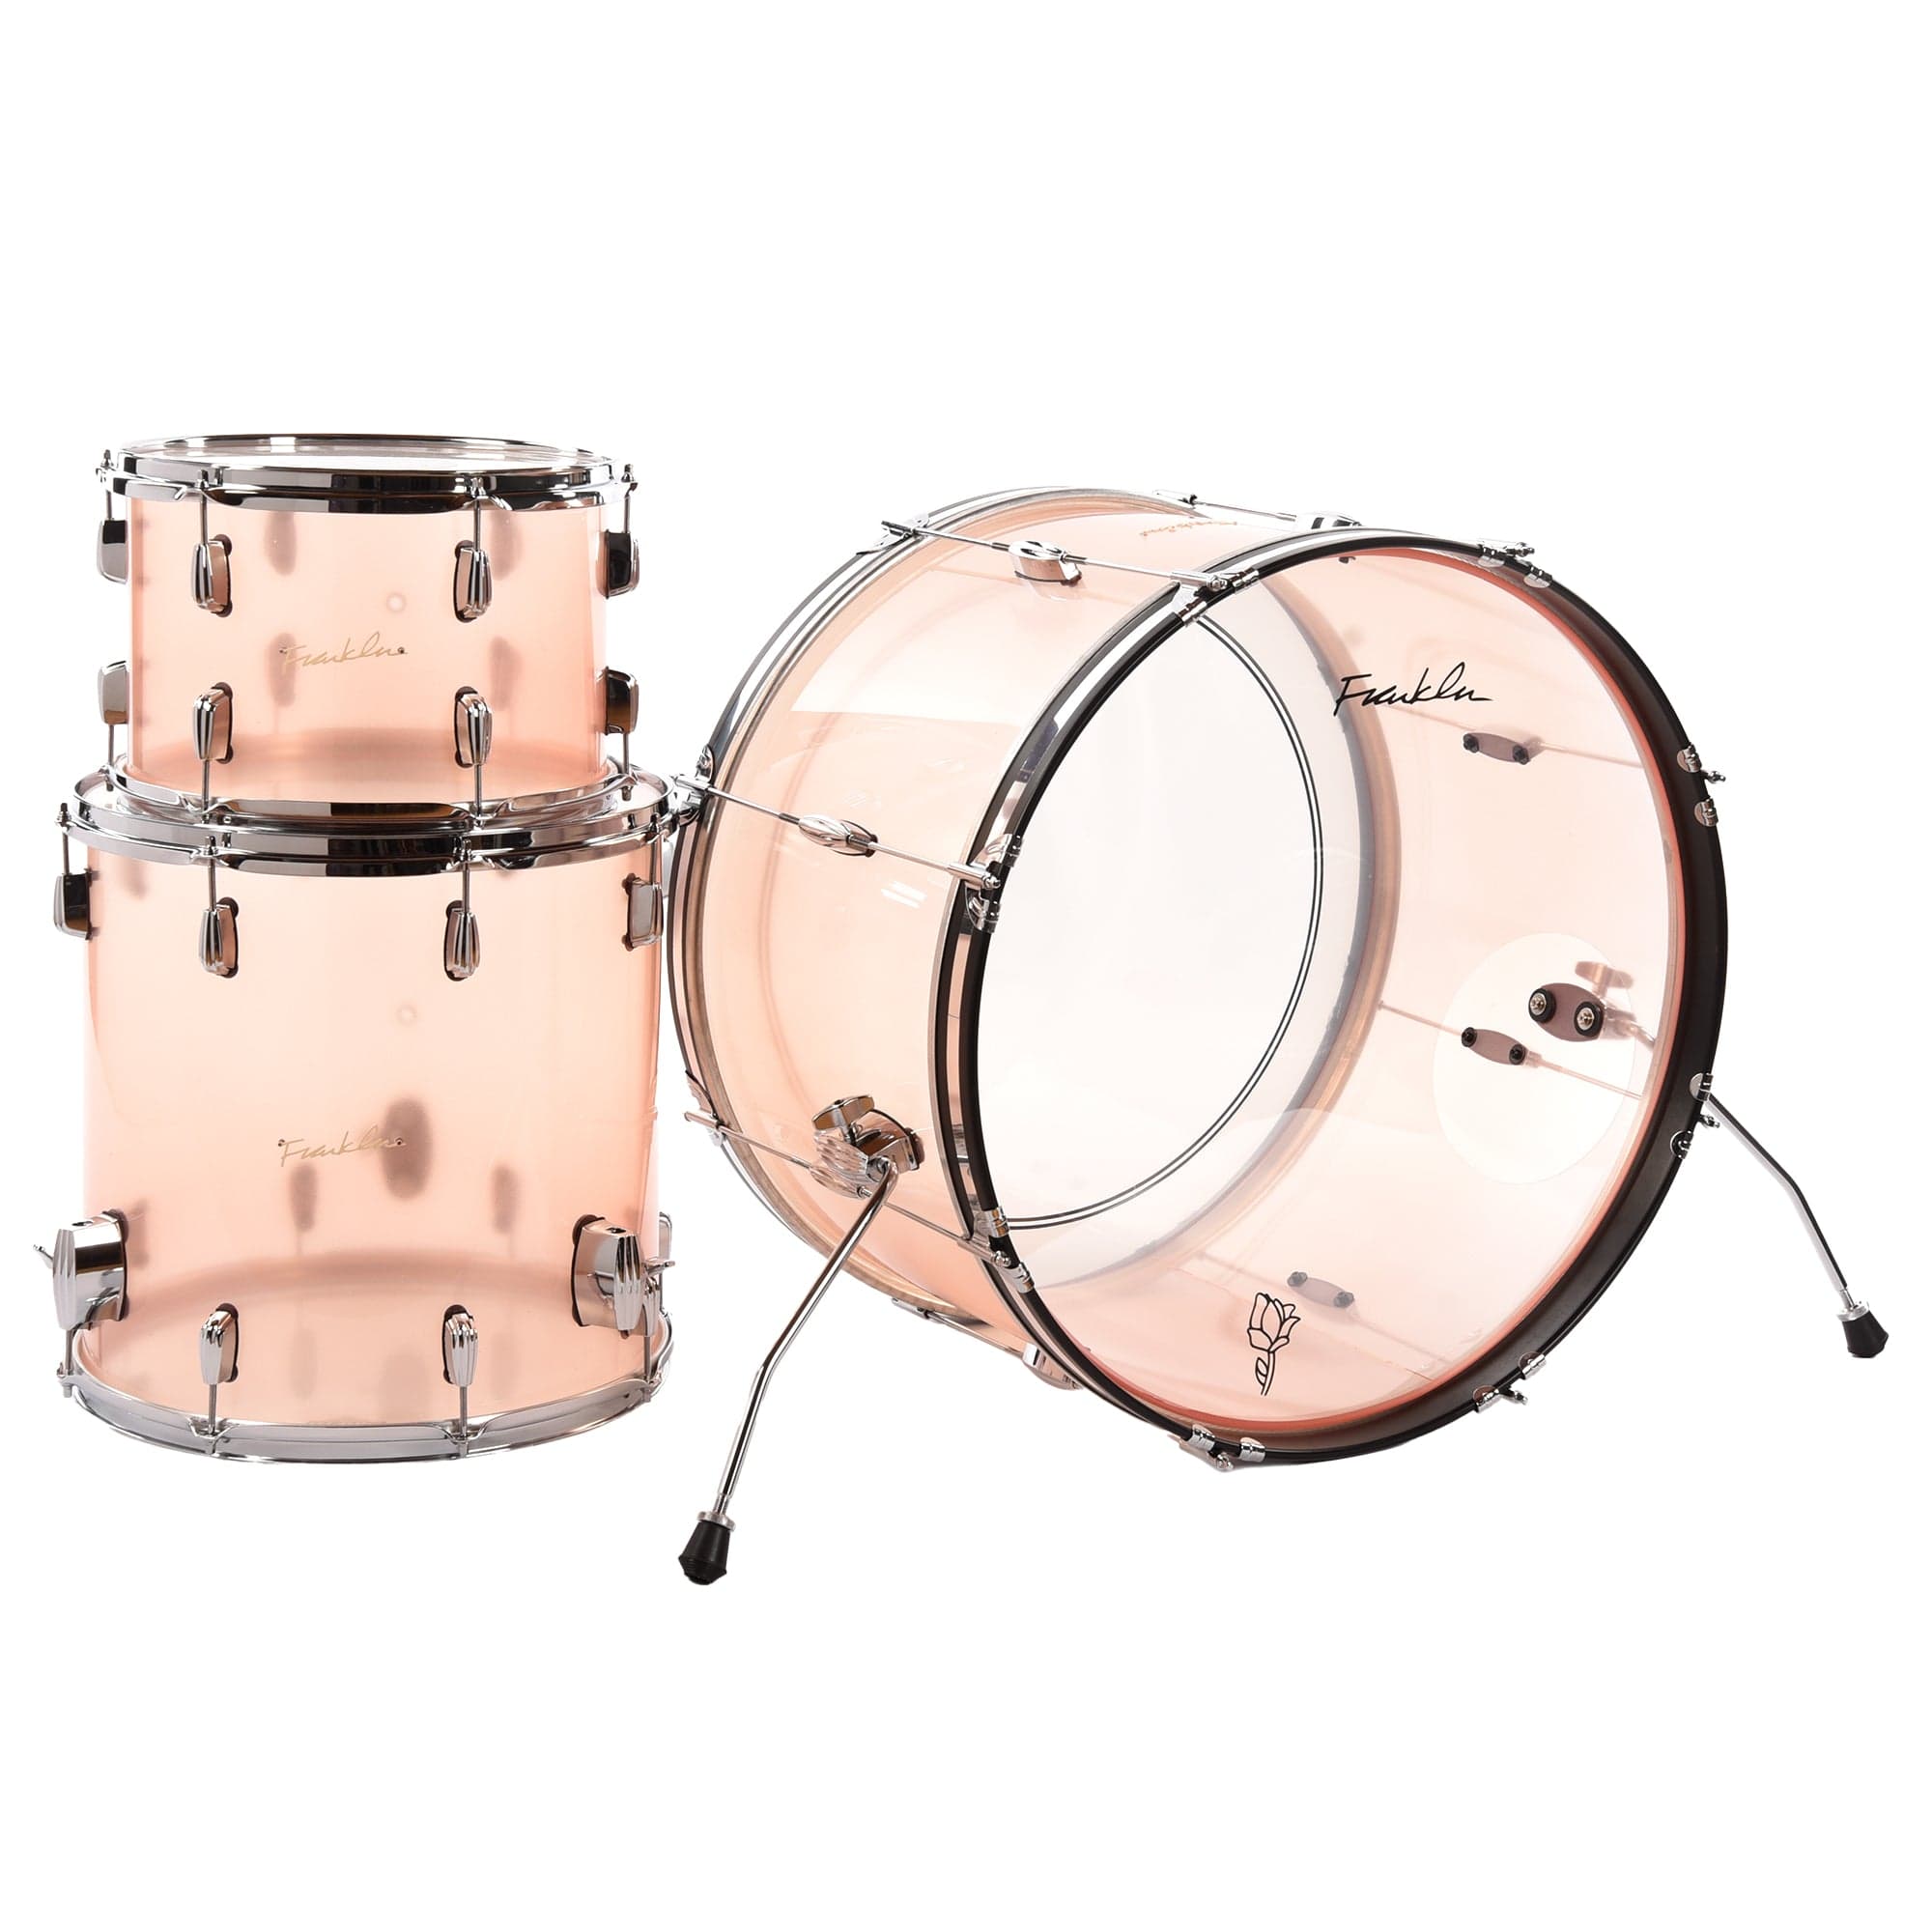 franklin-drum-co-drums-and-percussion-acoustic-drums-full-acoustic-kits-franklin-drum-co-13-16-24-3pc-acrylic-drum-kit-rose-gold-frk131624ac-rg-31087832596615_2000x__PID:1bf11b0c-121d-4b6a-a2e6-cc71314eb3a7